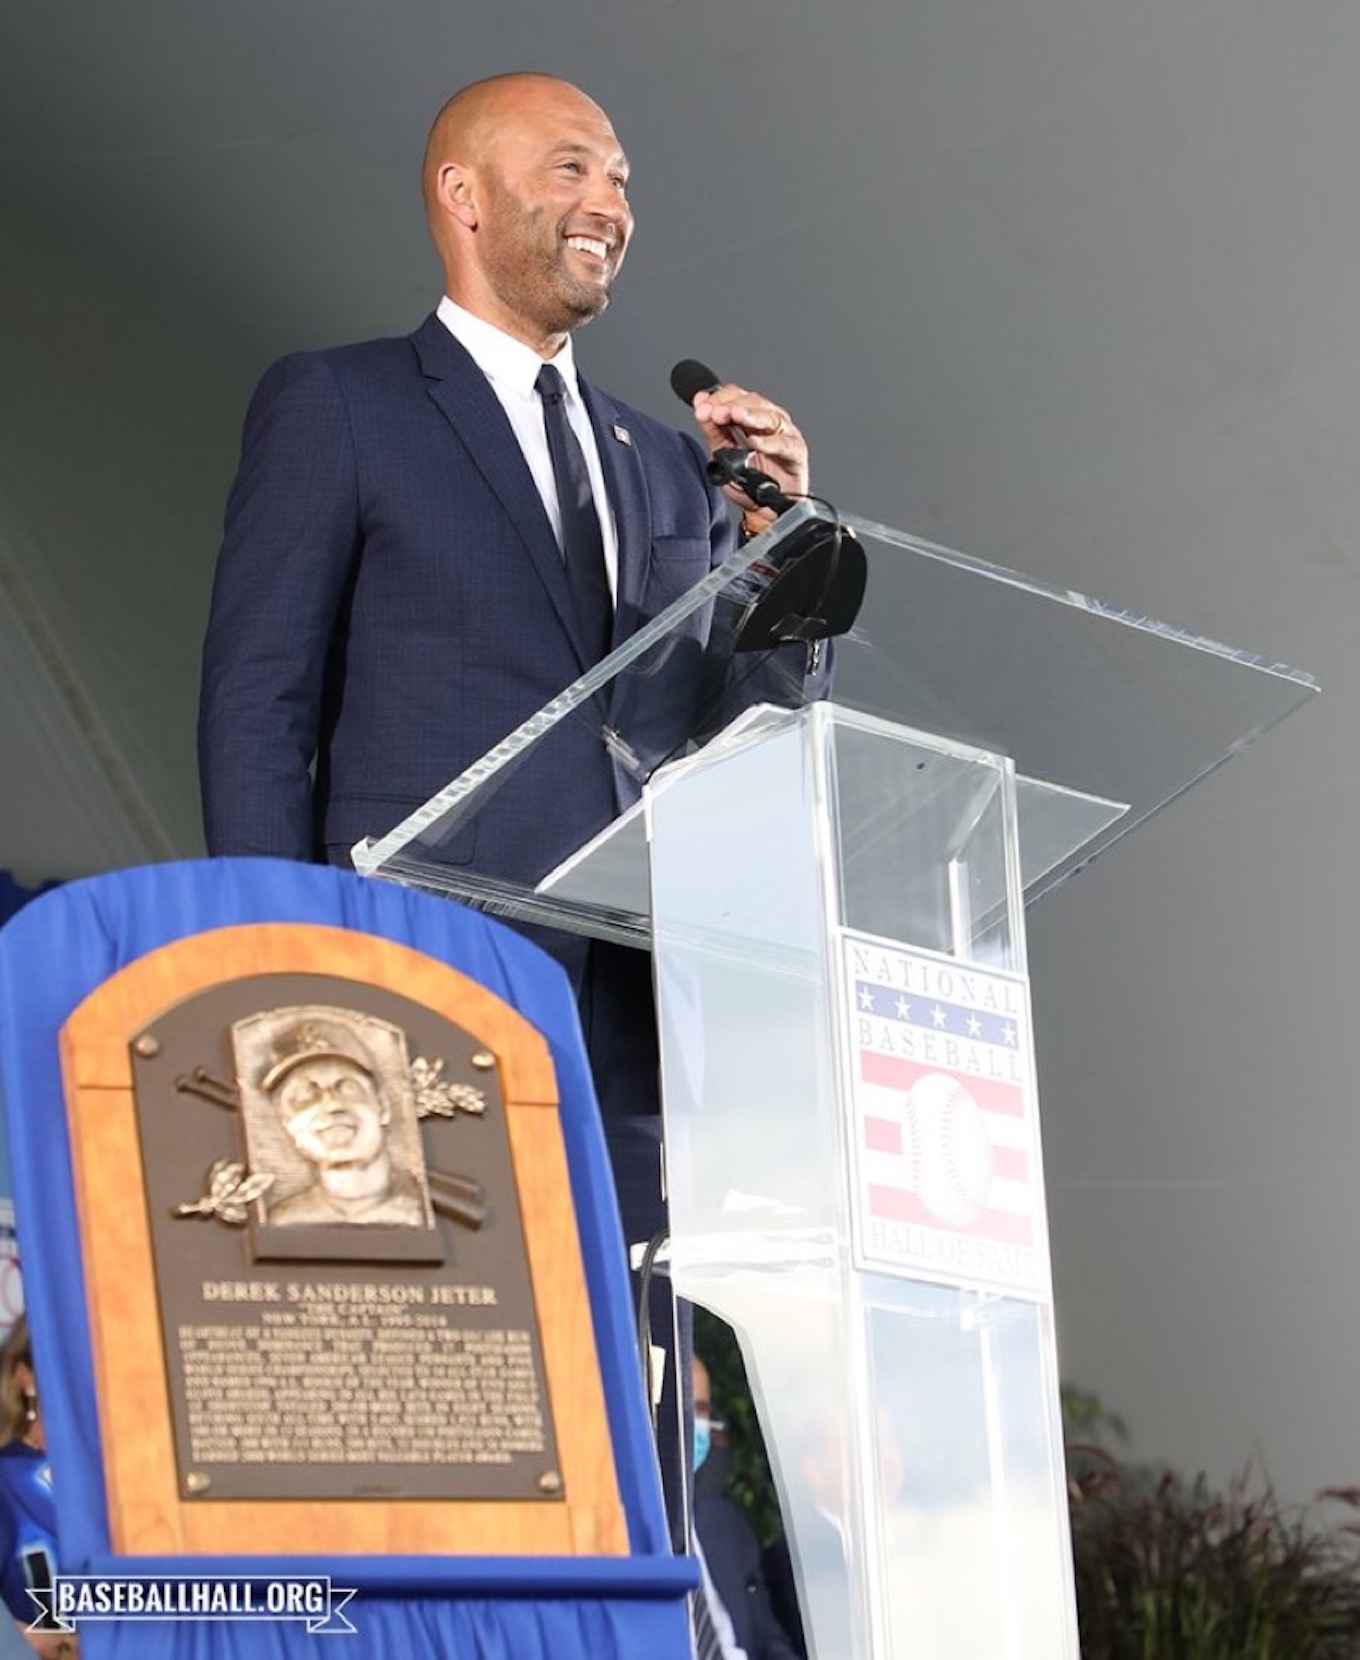 Derek “The Captain” Jeter enters the Hall of Fame